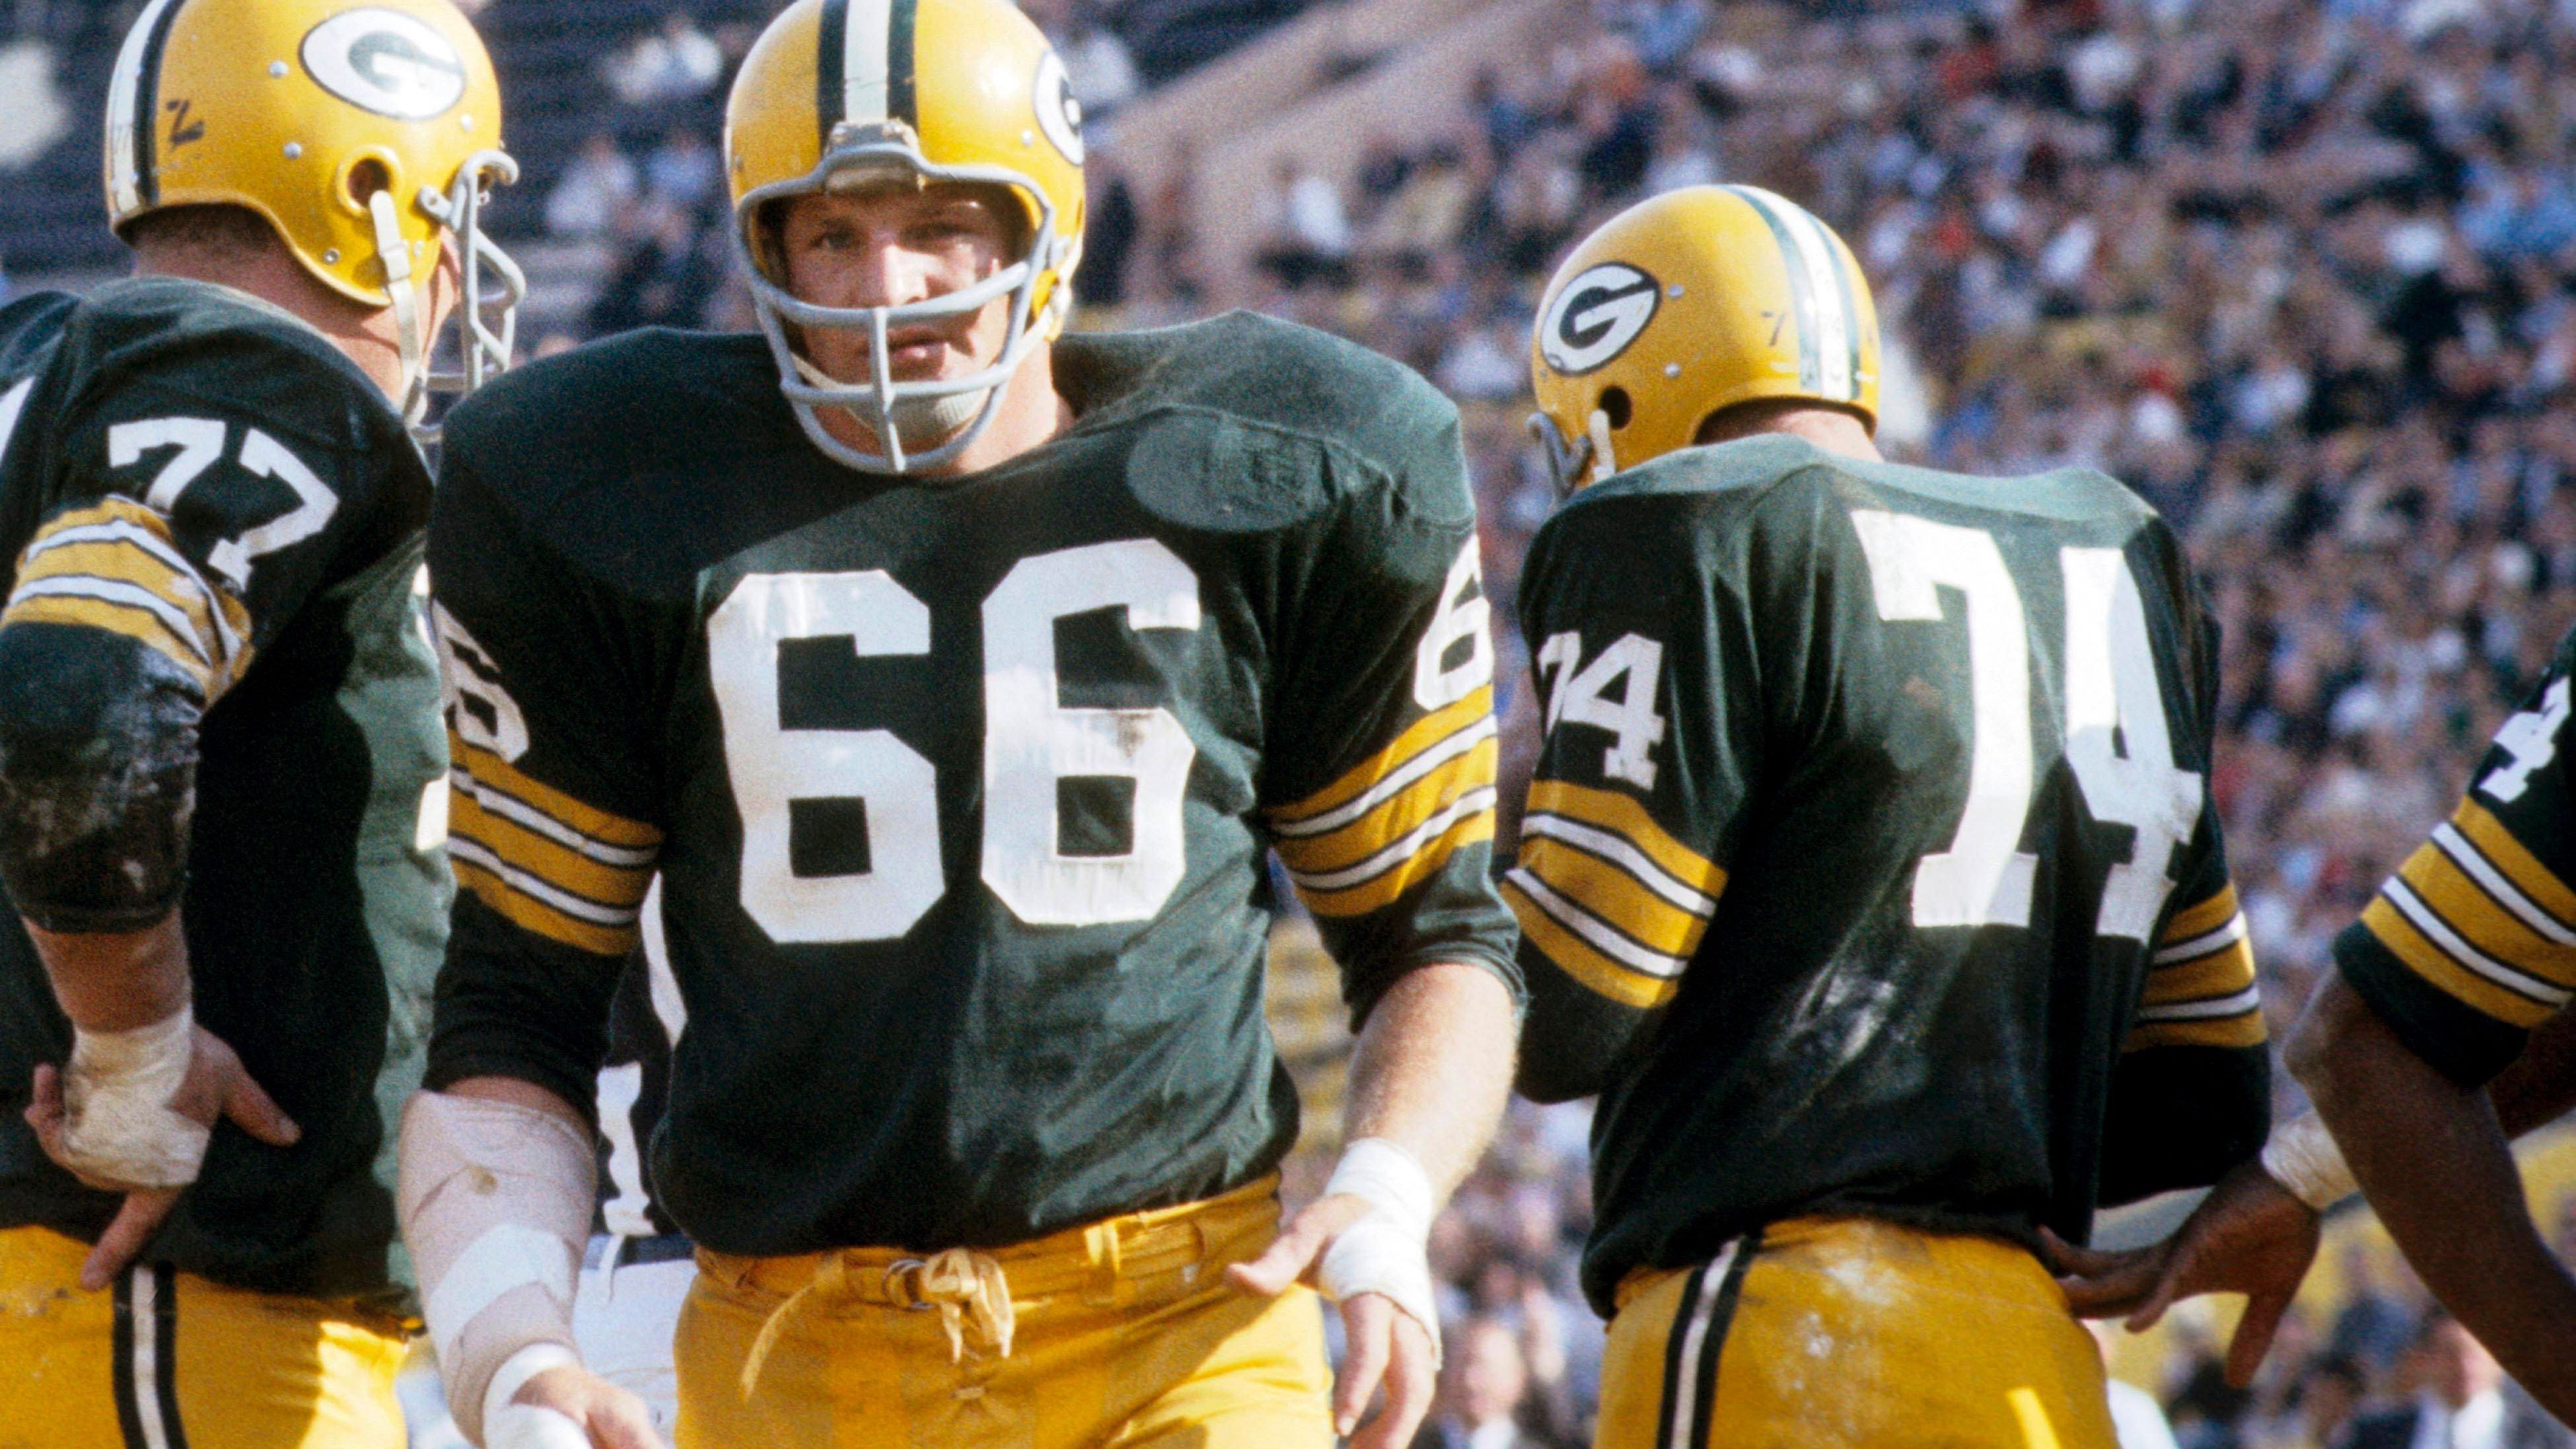 <strong>66: Ray Nitschke</strong><br>Team: Green Bay Packers<br>Position: Linebacker<br>Erfolge: Pro Football Hall of Famer, fünfmaliger NFL-Champion, zweimaliger Super-Bowl-Champion, zweimaliger First Team All-Pro<br>Honorable Mention: Alan Faneca